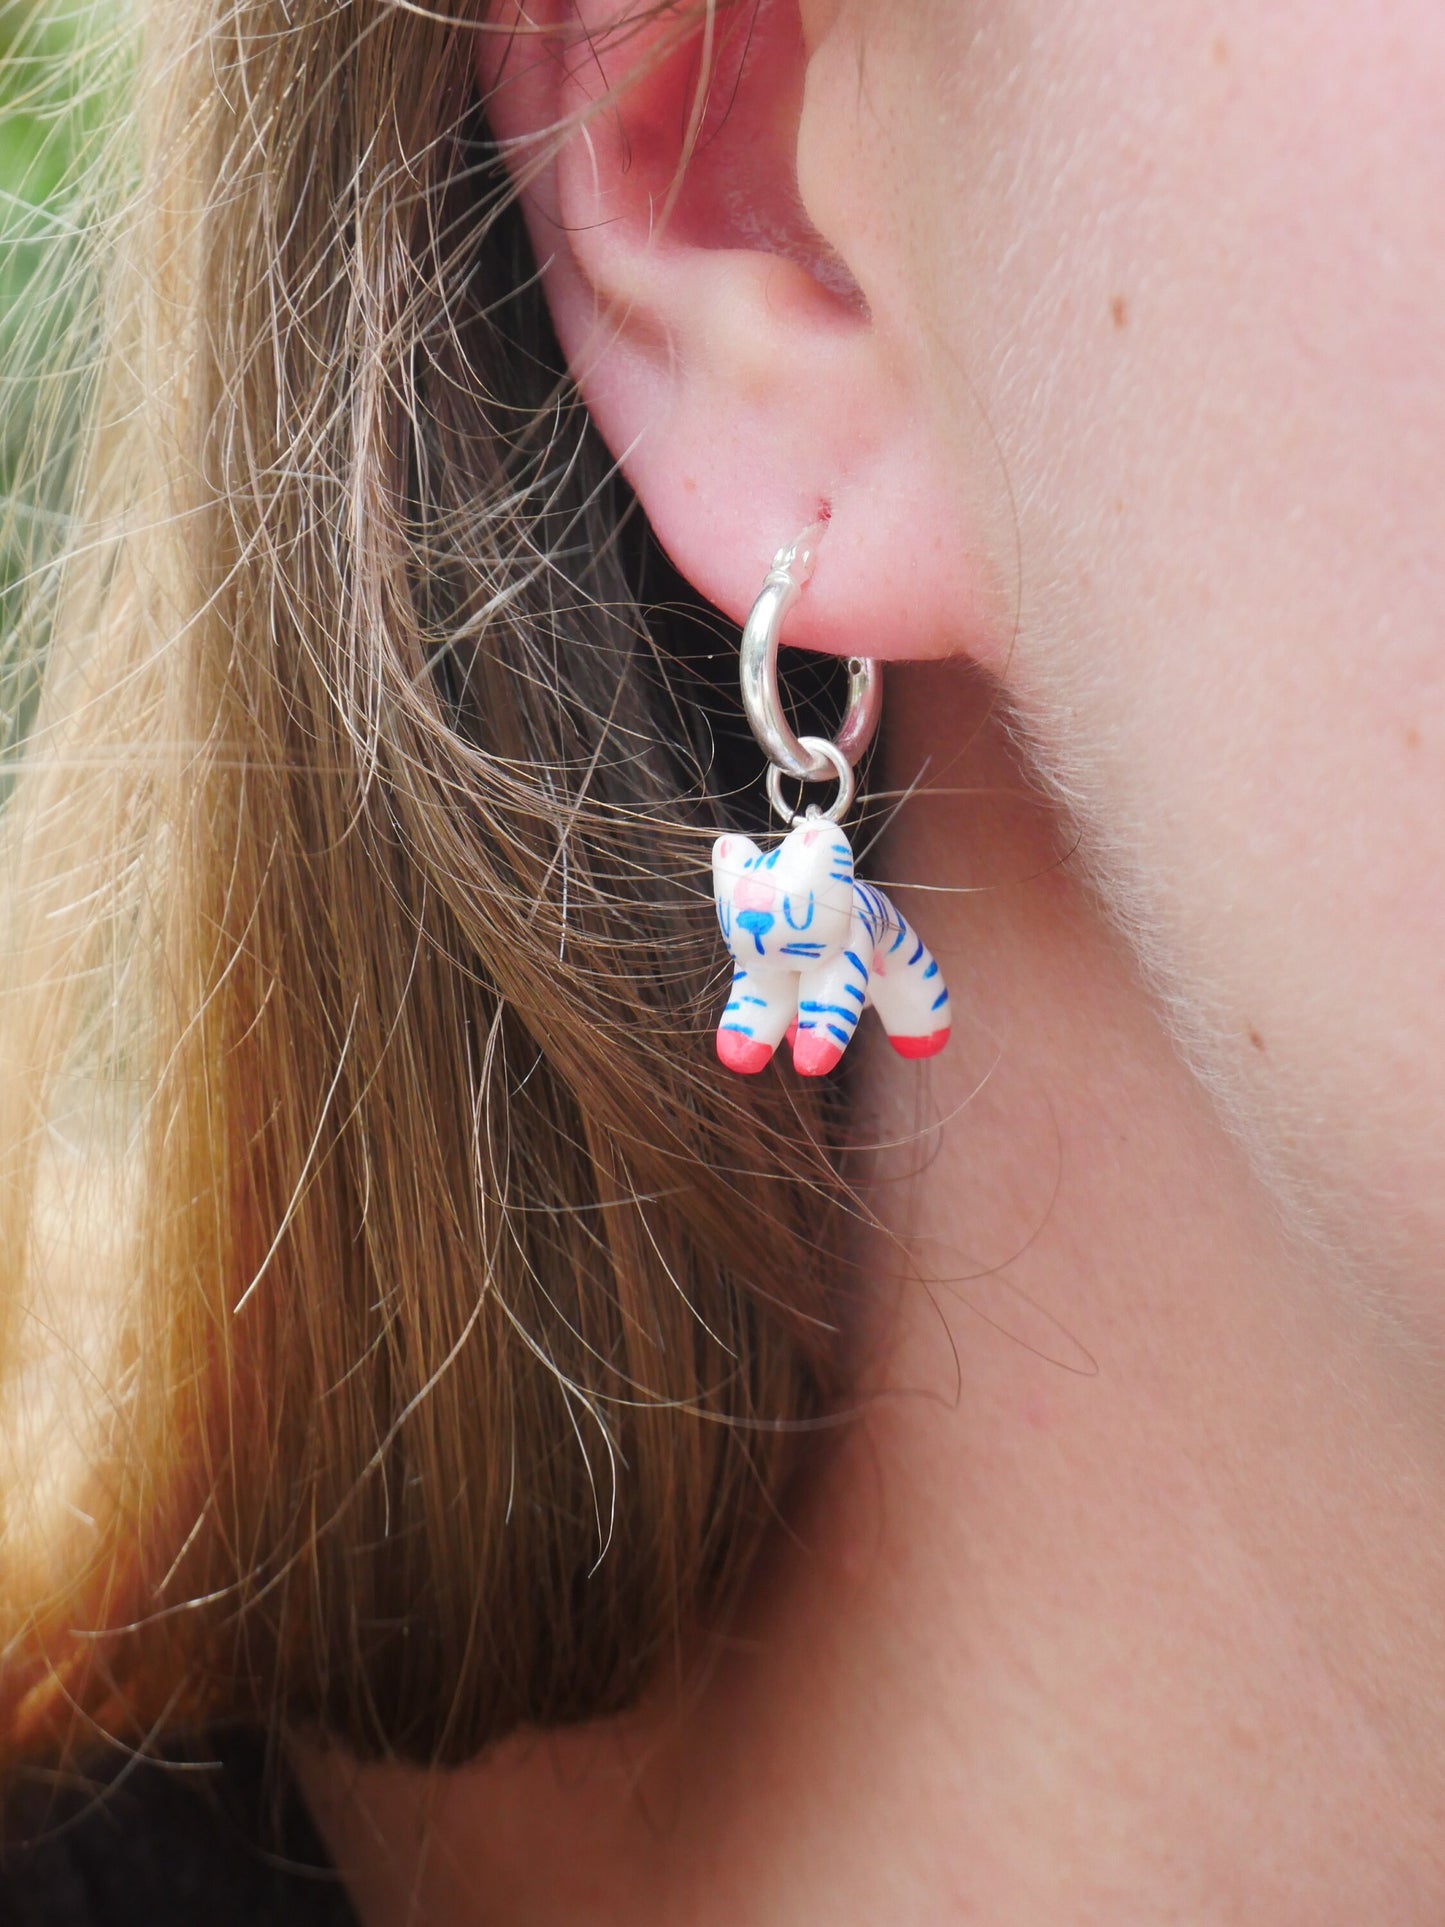 Tiger Smiley Cherry Earrings